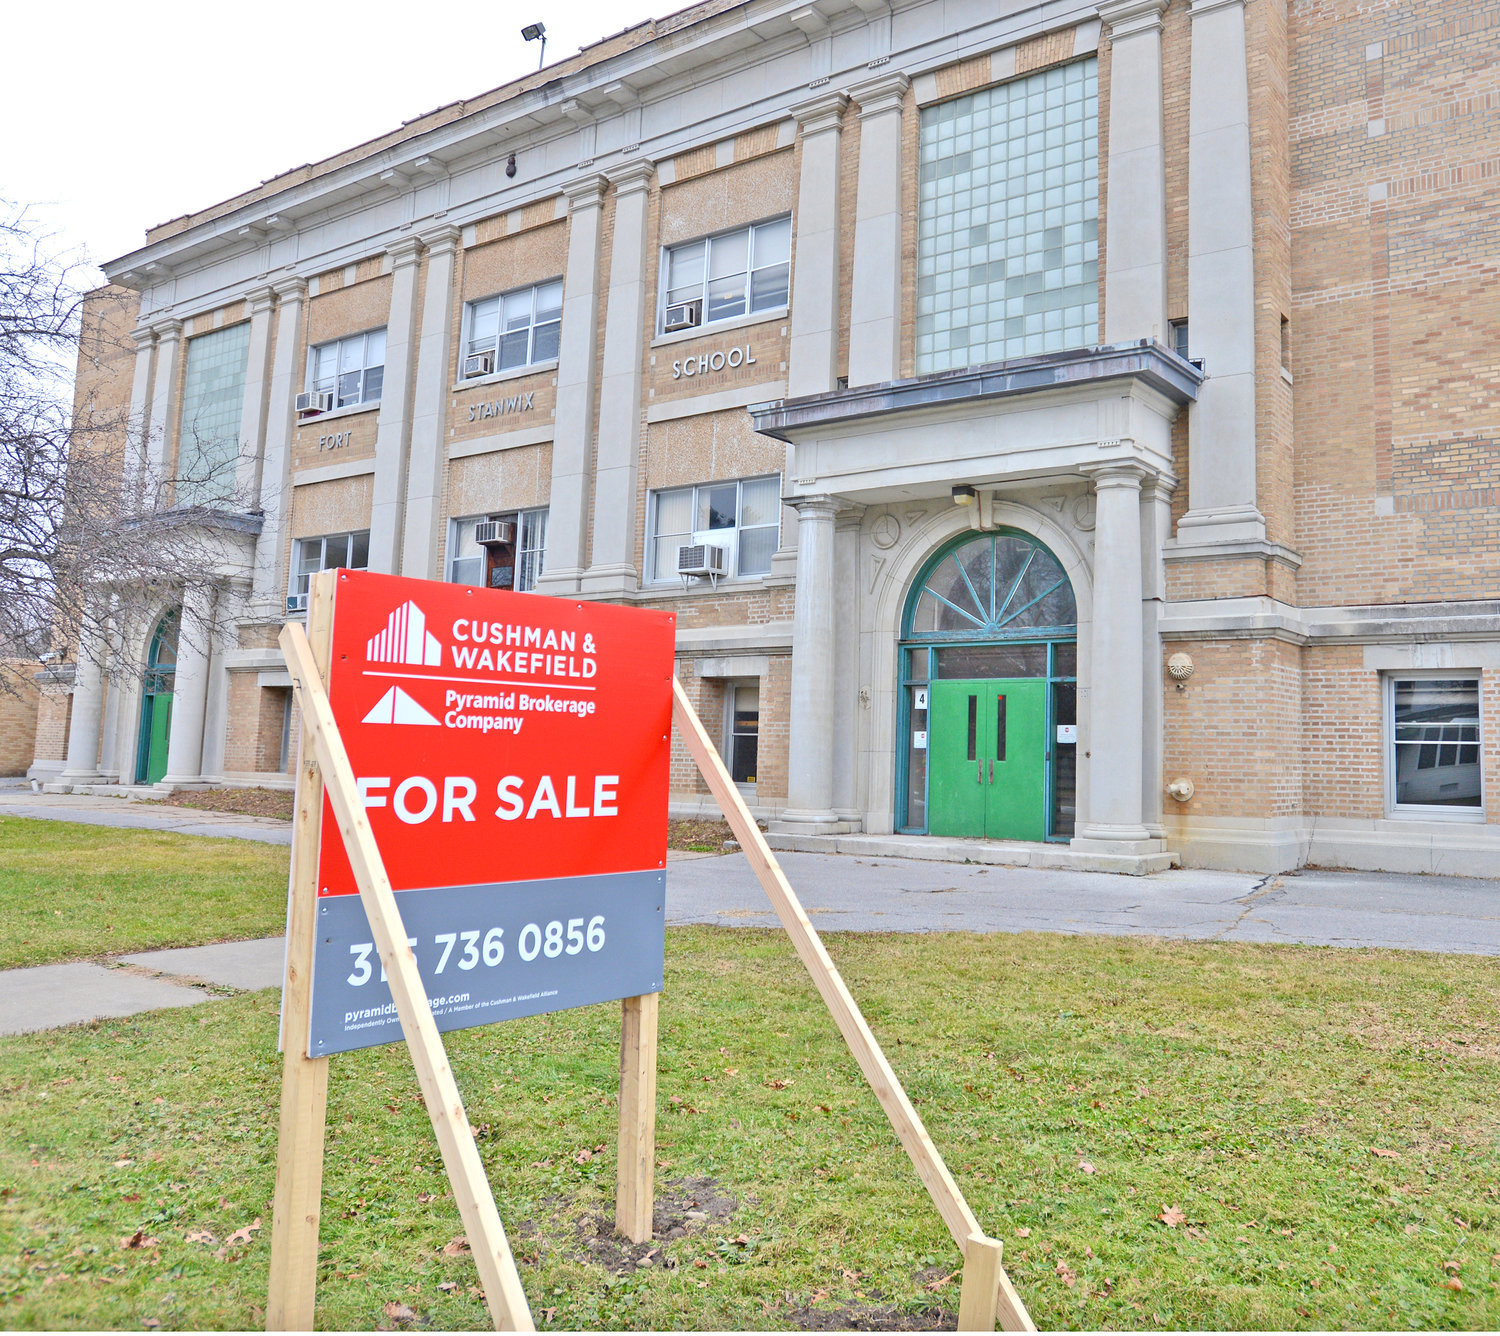 The former Fort Stanwix Elementary School, at 110 W. Linden St., in Rome, sits empty with a “for sale” sign in front in this Sentinel file photo. Efforts to sell the parcel continue, and the Rome City School District’s board of education has approved a resolution to extend a contract with the Pyramid Brokerage Company to help sell the property.